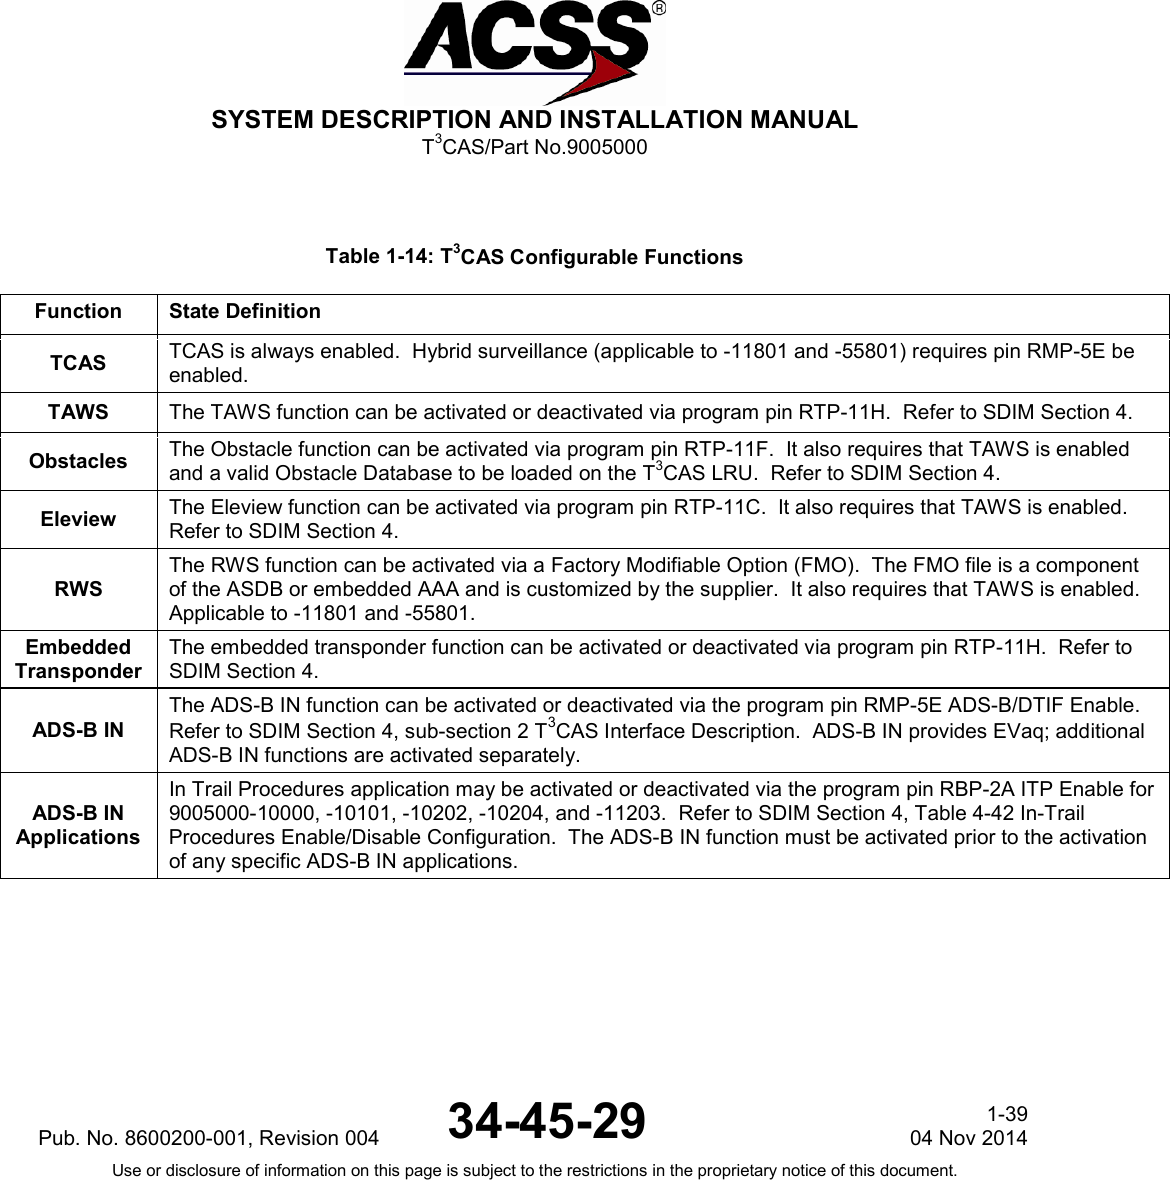  SYSTEM DESCRIPTION AND INSTALLATION MANUAL T3CAS/Part No.9005000  Table 1-14: T3CAS Configurable Functions Function State Definition TCAS TCAS is always enabled.  Hybrid surveillance (applicable to -11801 and -55801) requires pin RMP-5E be enabled. TAWS The TAWS function can be activated or deactivated via program pin RTP-11H.  Refer to SDIM Section 4. Obstacles The Obstacle function can be activated via program pin RTP-11F.  It also requires that TAWS is enabled and a valid Obstacle Database to be loaded on the T3CAS LRU.  Refer to SDIM Section 4. Eleview The Eleview function can be activated via program pin RTP-11C.  It also requires that TAWS is enabled.  Refer to SDIM Section 4. RWS The RWS function can be activated via a Factory Modifiable Option (FMO).  The FMO file is a component of the ASDB or embedded AAA and is customized by the supplier.  It also requires that TAWS is enabled.  Applicable to -11801 and -55801. Embedded Transponder The embedded transponder function can be activated or deactivated via program pin RTP-11H.  Refer to SDIM Section 4. ADS-B IN The ADS-B IN function can be activated or deactivated via the program pin RMP-5E ADS-B/DTIF Enable.  Refer to SDIM Section 4, sub-section 2 T3CAS Interface Description.  ADS-B IN provides EVaq; additional ADS-B IN functions are activated separately. ADS-B IN Applications In Trail Procedures application may be activated or deactivated via the program pin RBP-2A ITP Enable for 9005000-10000, -10101, -10202, -10204, and -11203.  Refer to SDIM Section 4, Table 4-42 In-Trail Procedures Enable/Disable Configuration.  The ADS-B IN function must be activated prior to the activation of any specific ADS-B IN applications.  Pub. No. 8600200-001, Revision 004 34-45-29 1-39 04 Nov 2014 Use or disclosure of information on this page is subject to the restrictions in the proprietary notice of this document.  